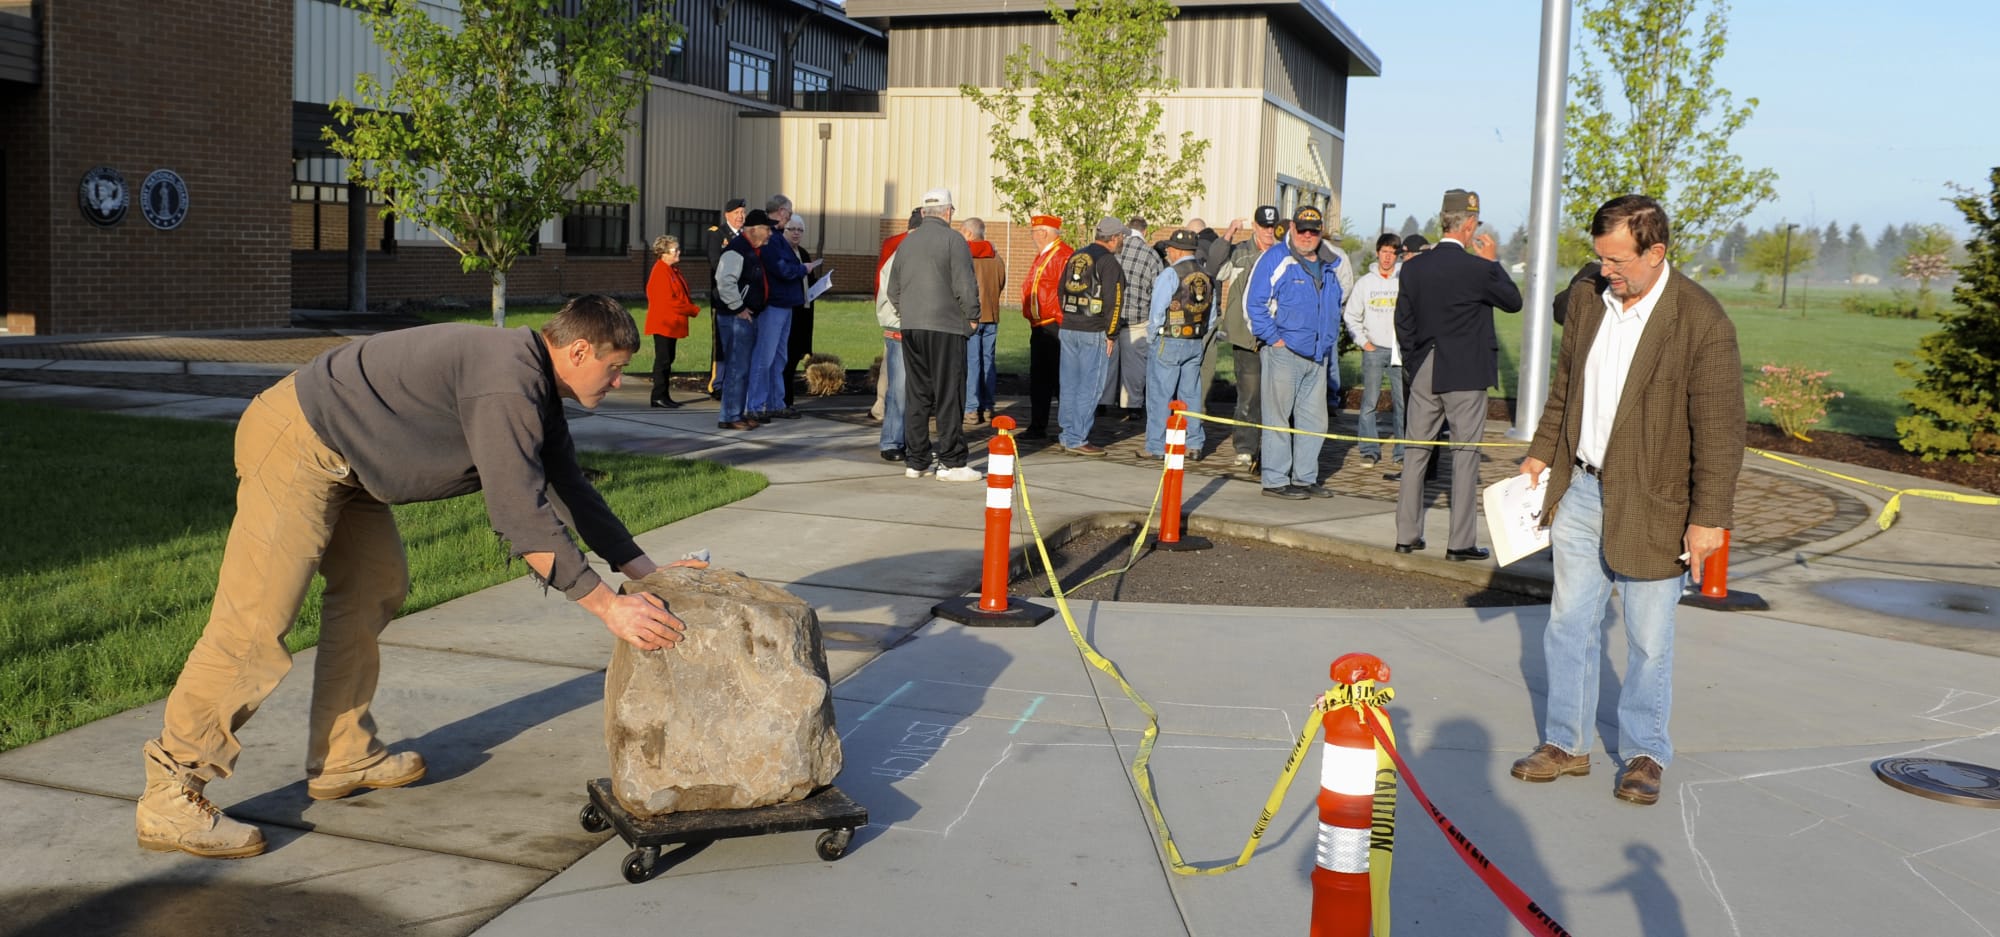 Alek Igumnov, left, is directed by Kelly Punteney, right, as he moves the stone into position.